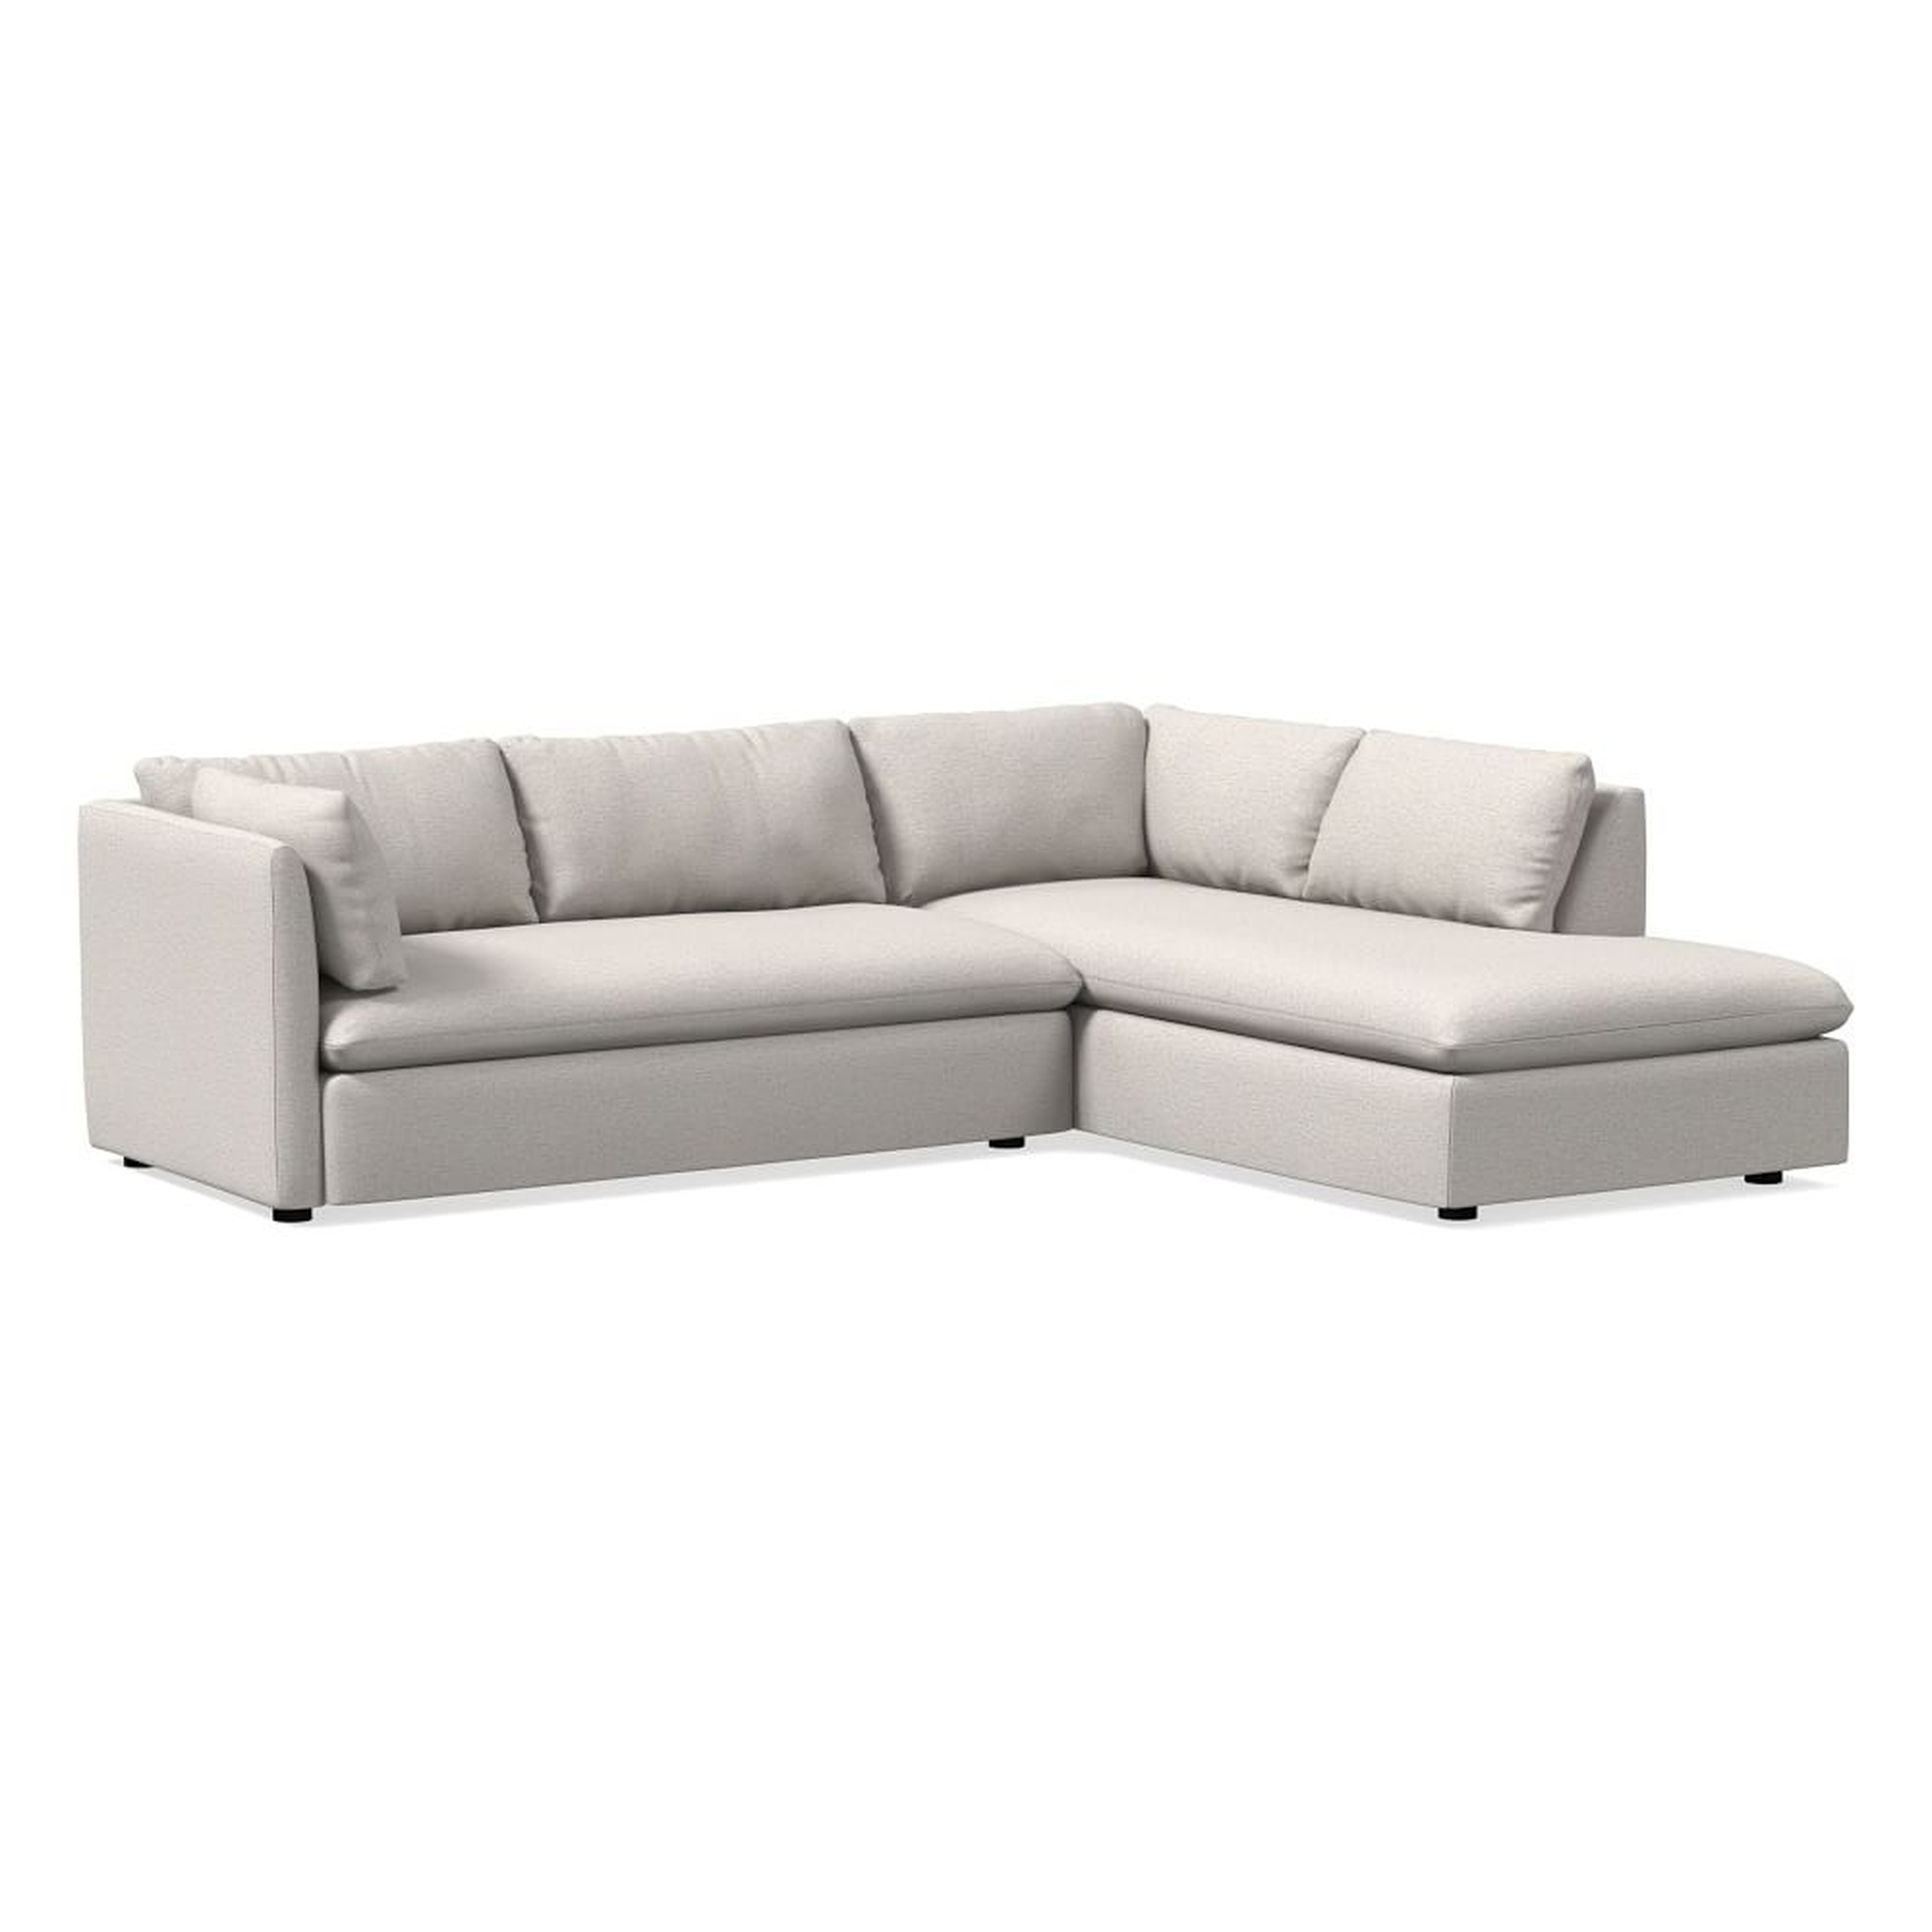 Shelter 106" Right 2-Piece Bumper Chaise Sectional, Twill, Sand - West Elm